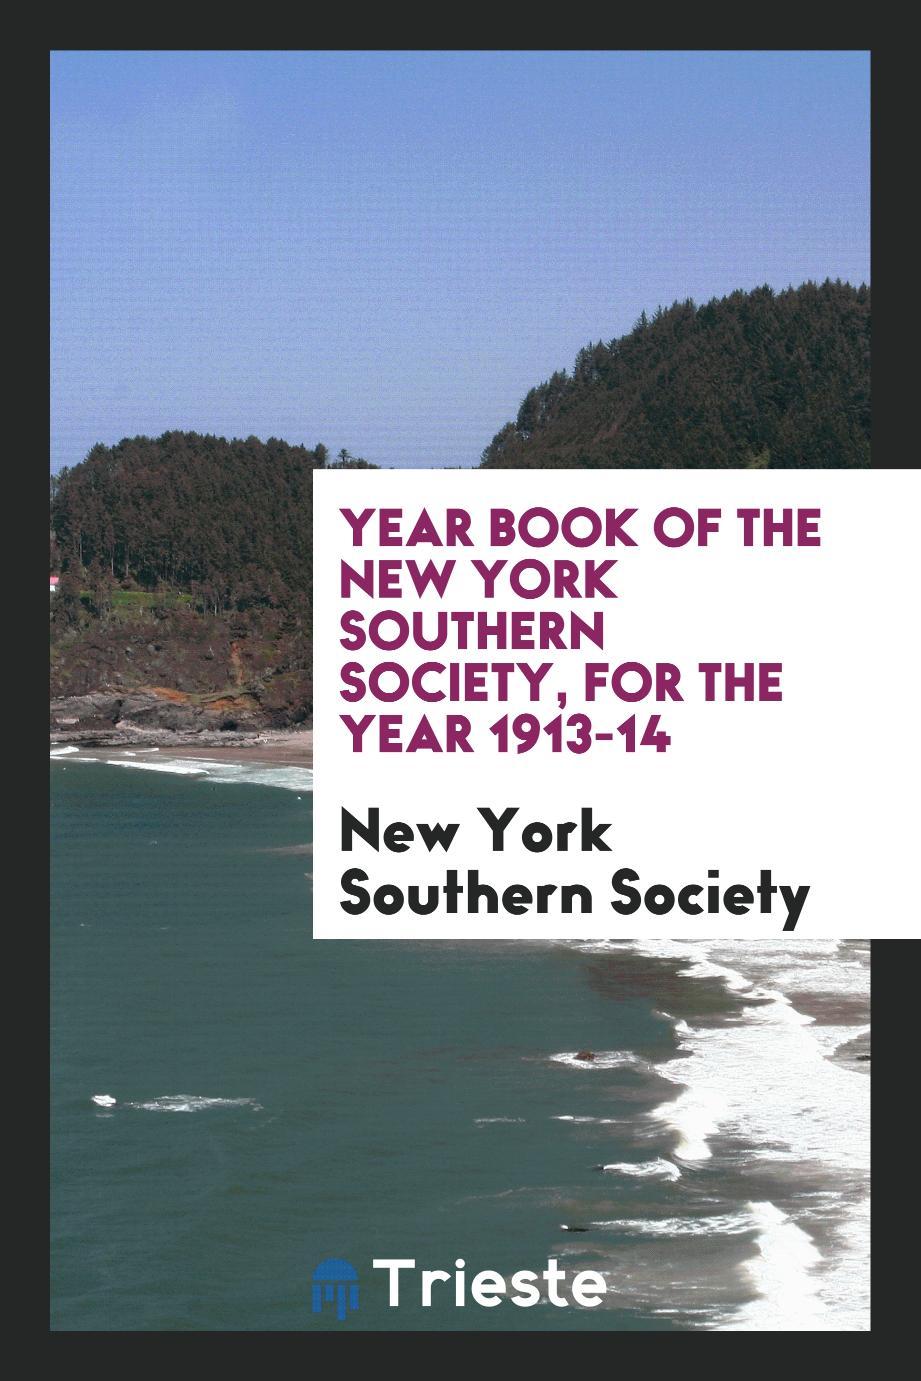 Year Book of the New York Southern Society, for the Year 1913-14